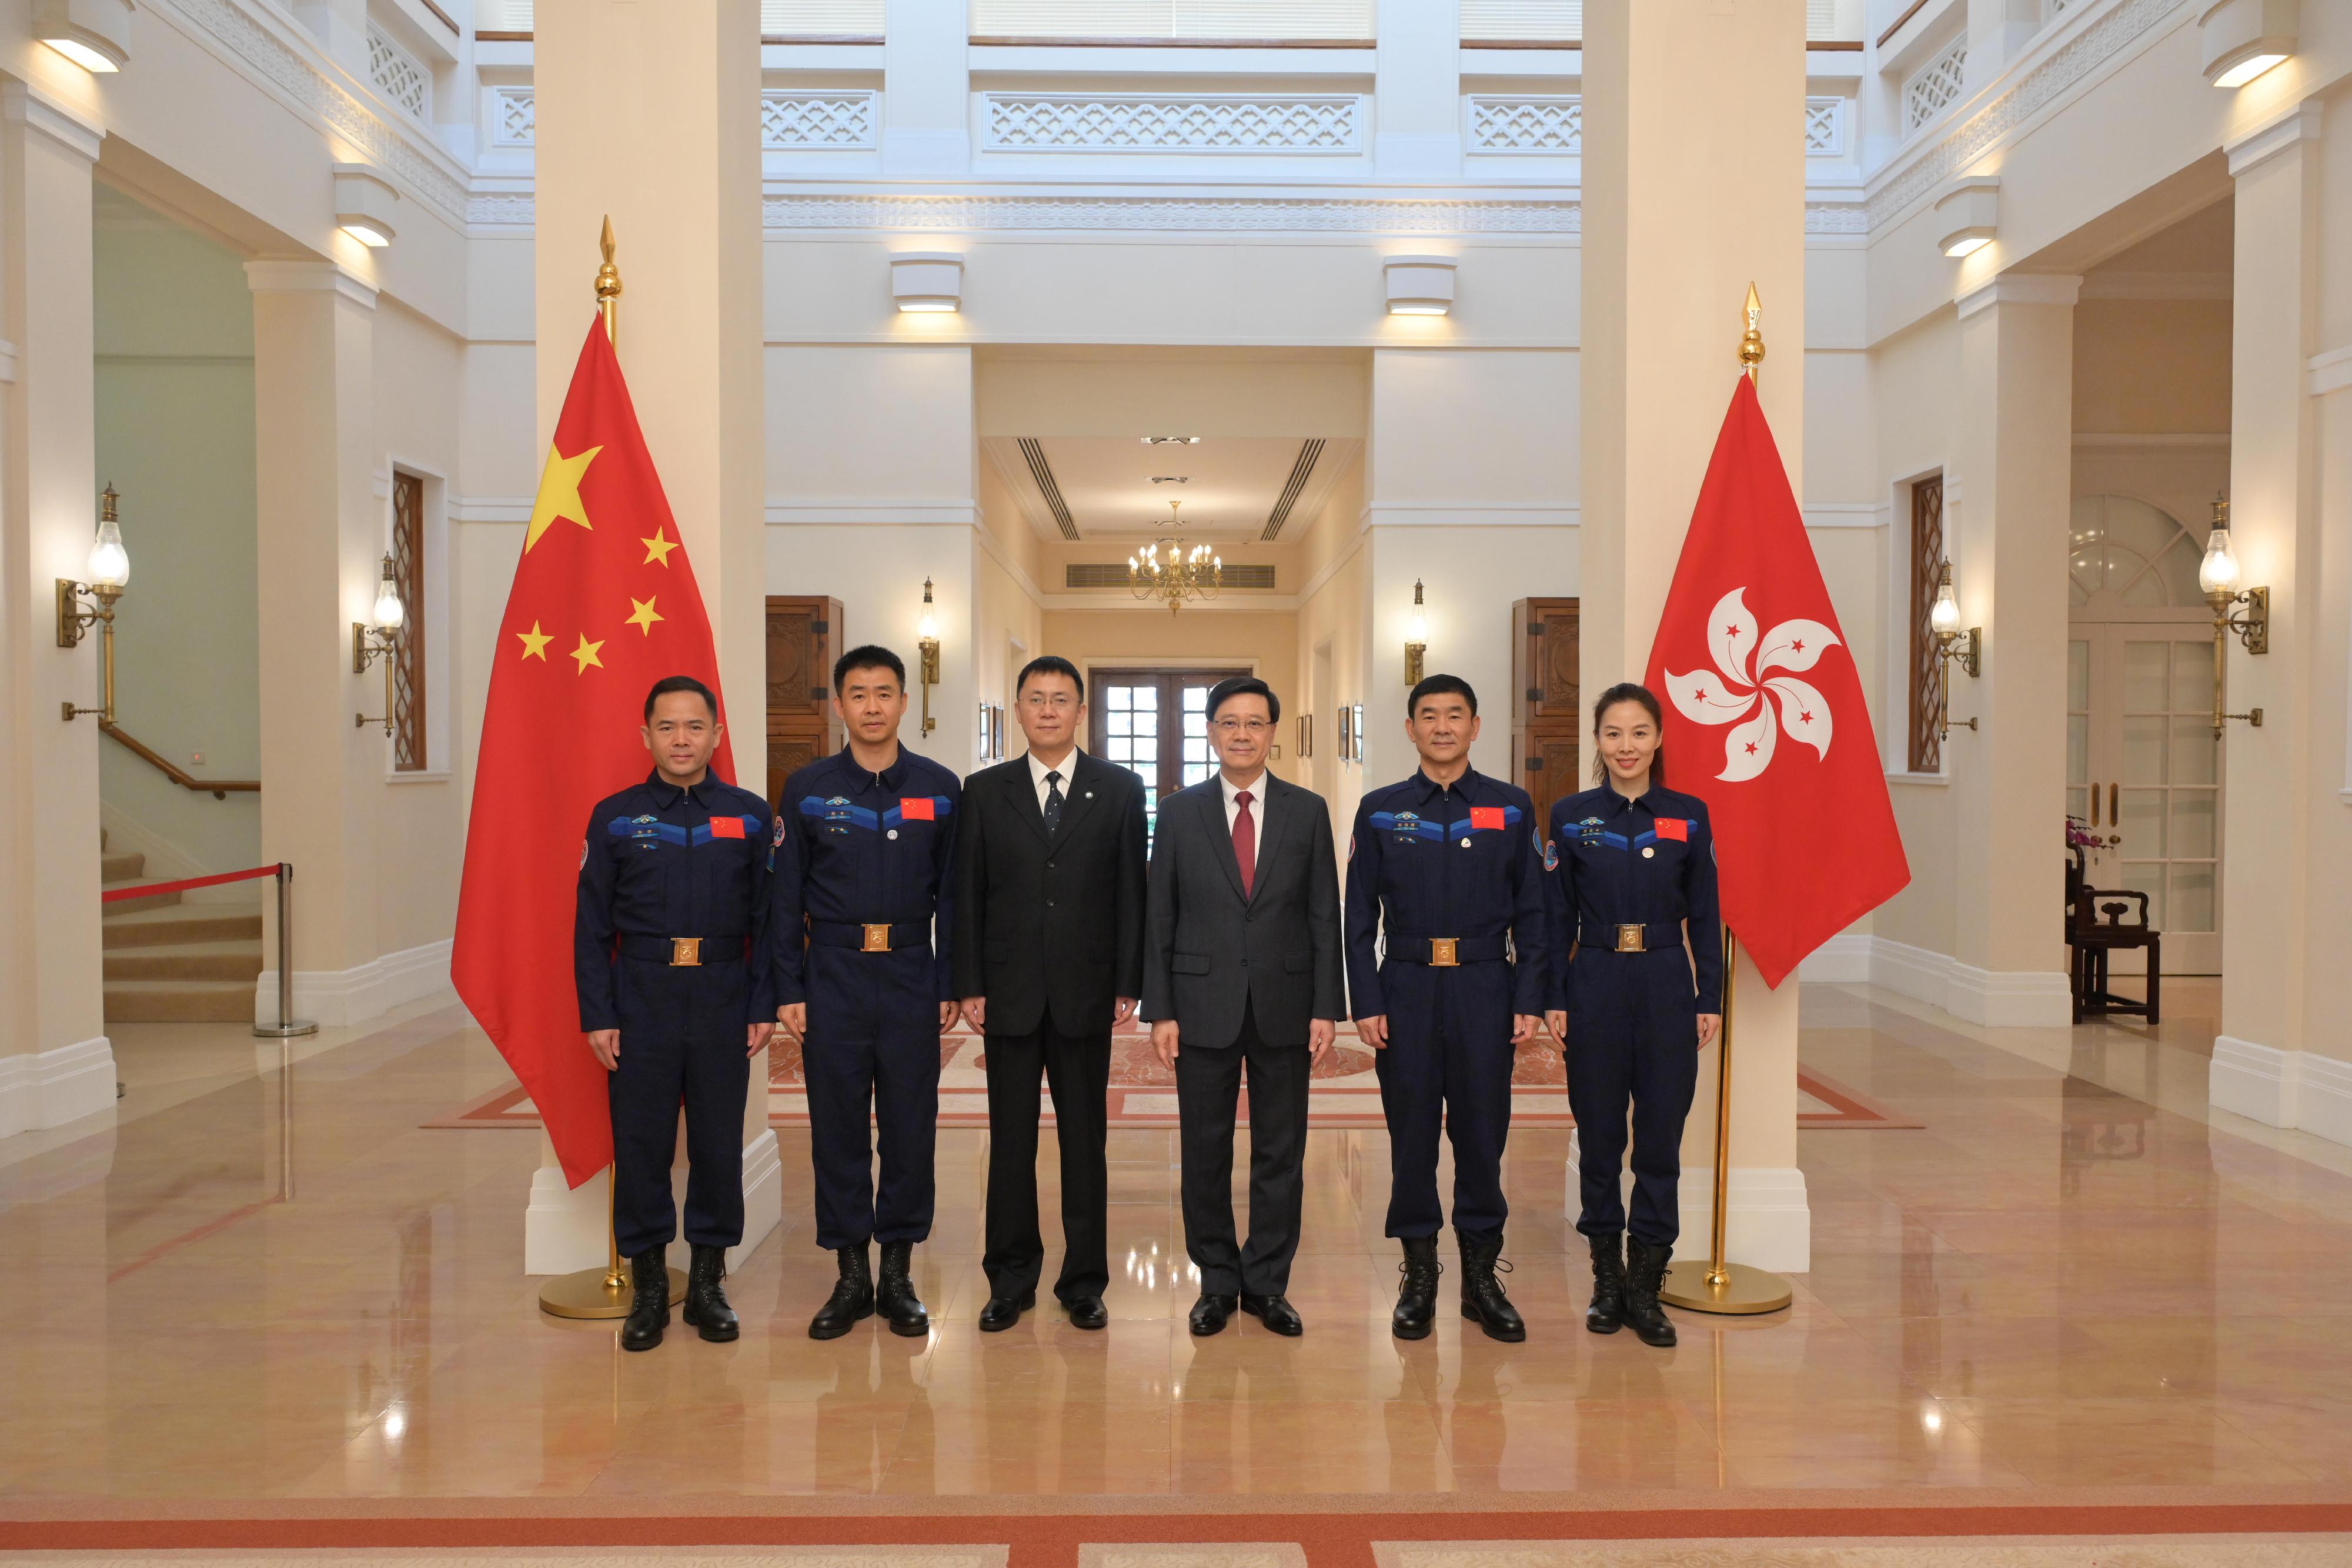 The China Manned Space delegation conducted their last day of visit to Hong Kong today (December 1). Photo shows the Chief Executive, Mr John Lee (third right); the leader of the delegation and Deputy Director General of the China Manned Space Agency, Mr Lin Xiqiang (third left); Shenzhou-12 astronaut Mr Liu Boming (second right); Shenzhou-13 astronaut Ms Wang Yaping (first right); Shenzhou-14 mission commander Mr Chen Dong (second left); and Shenzhou-15 astronaut Mr Zhang Lu (first left), before the farewell ceremony for the delegation.